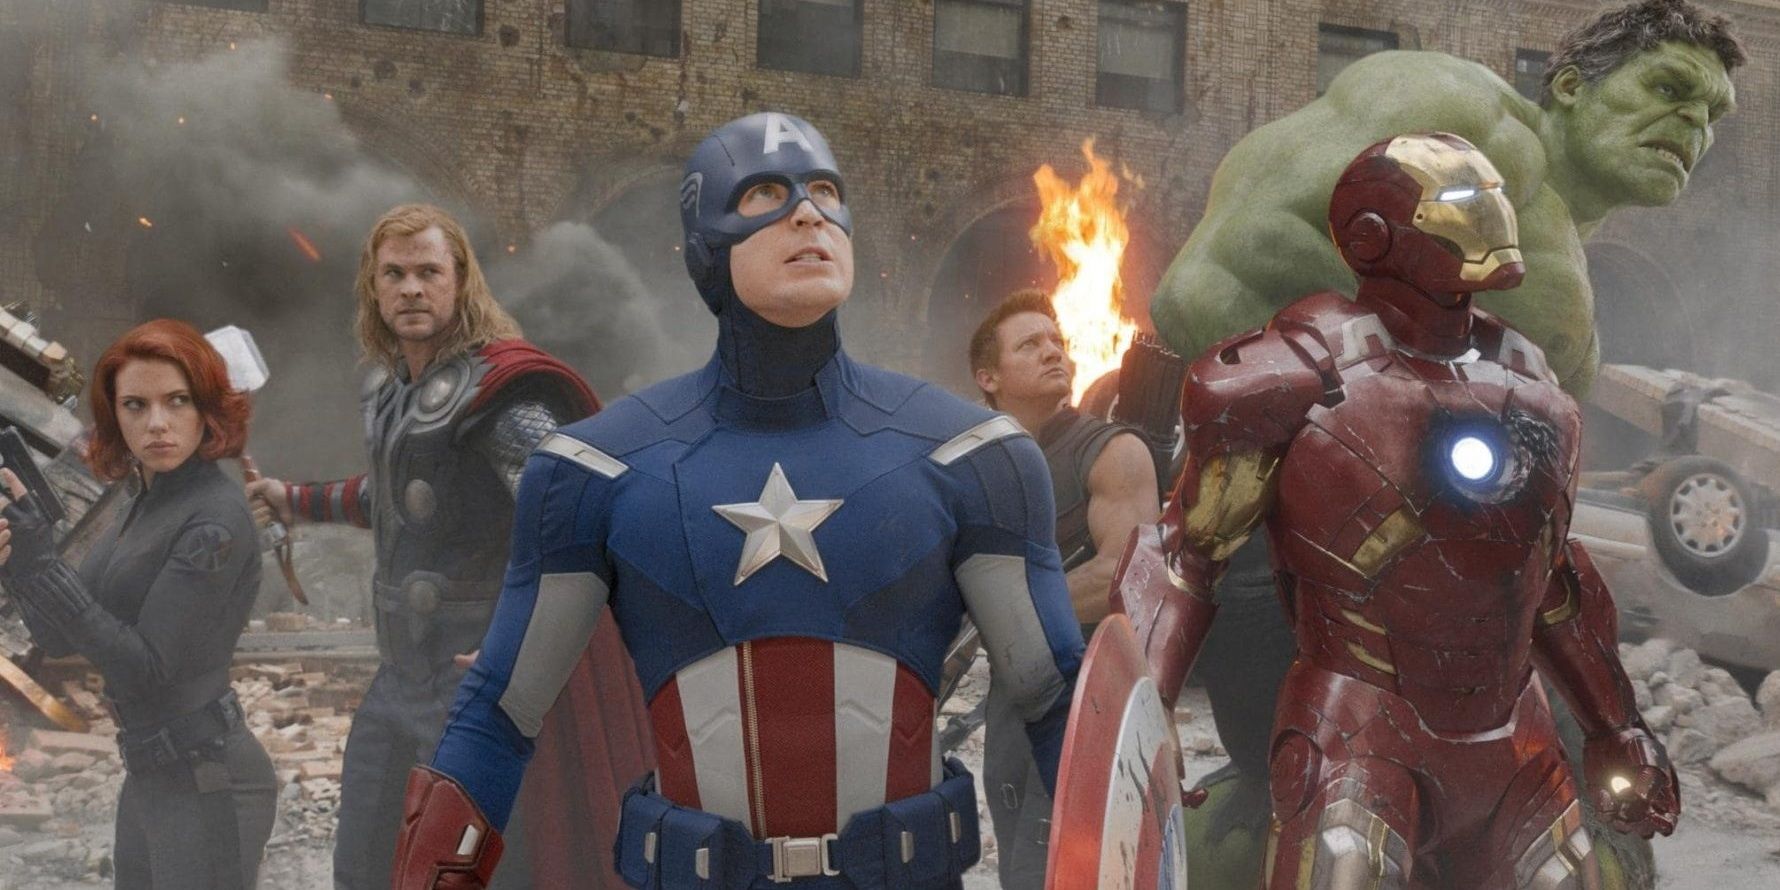 The Avengers assemble on a destroyed street from The Avengers 